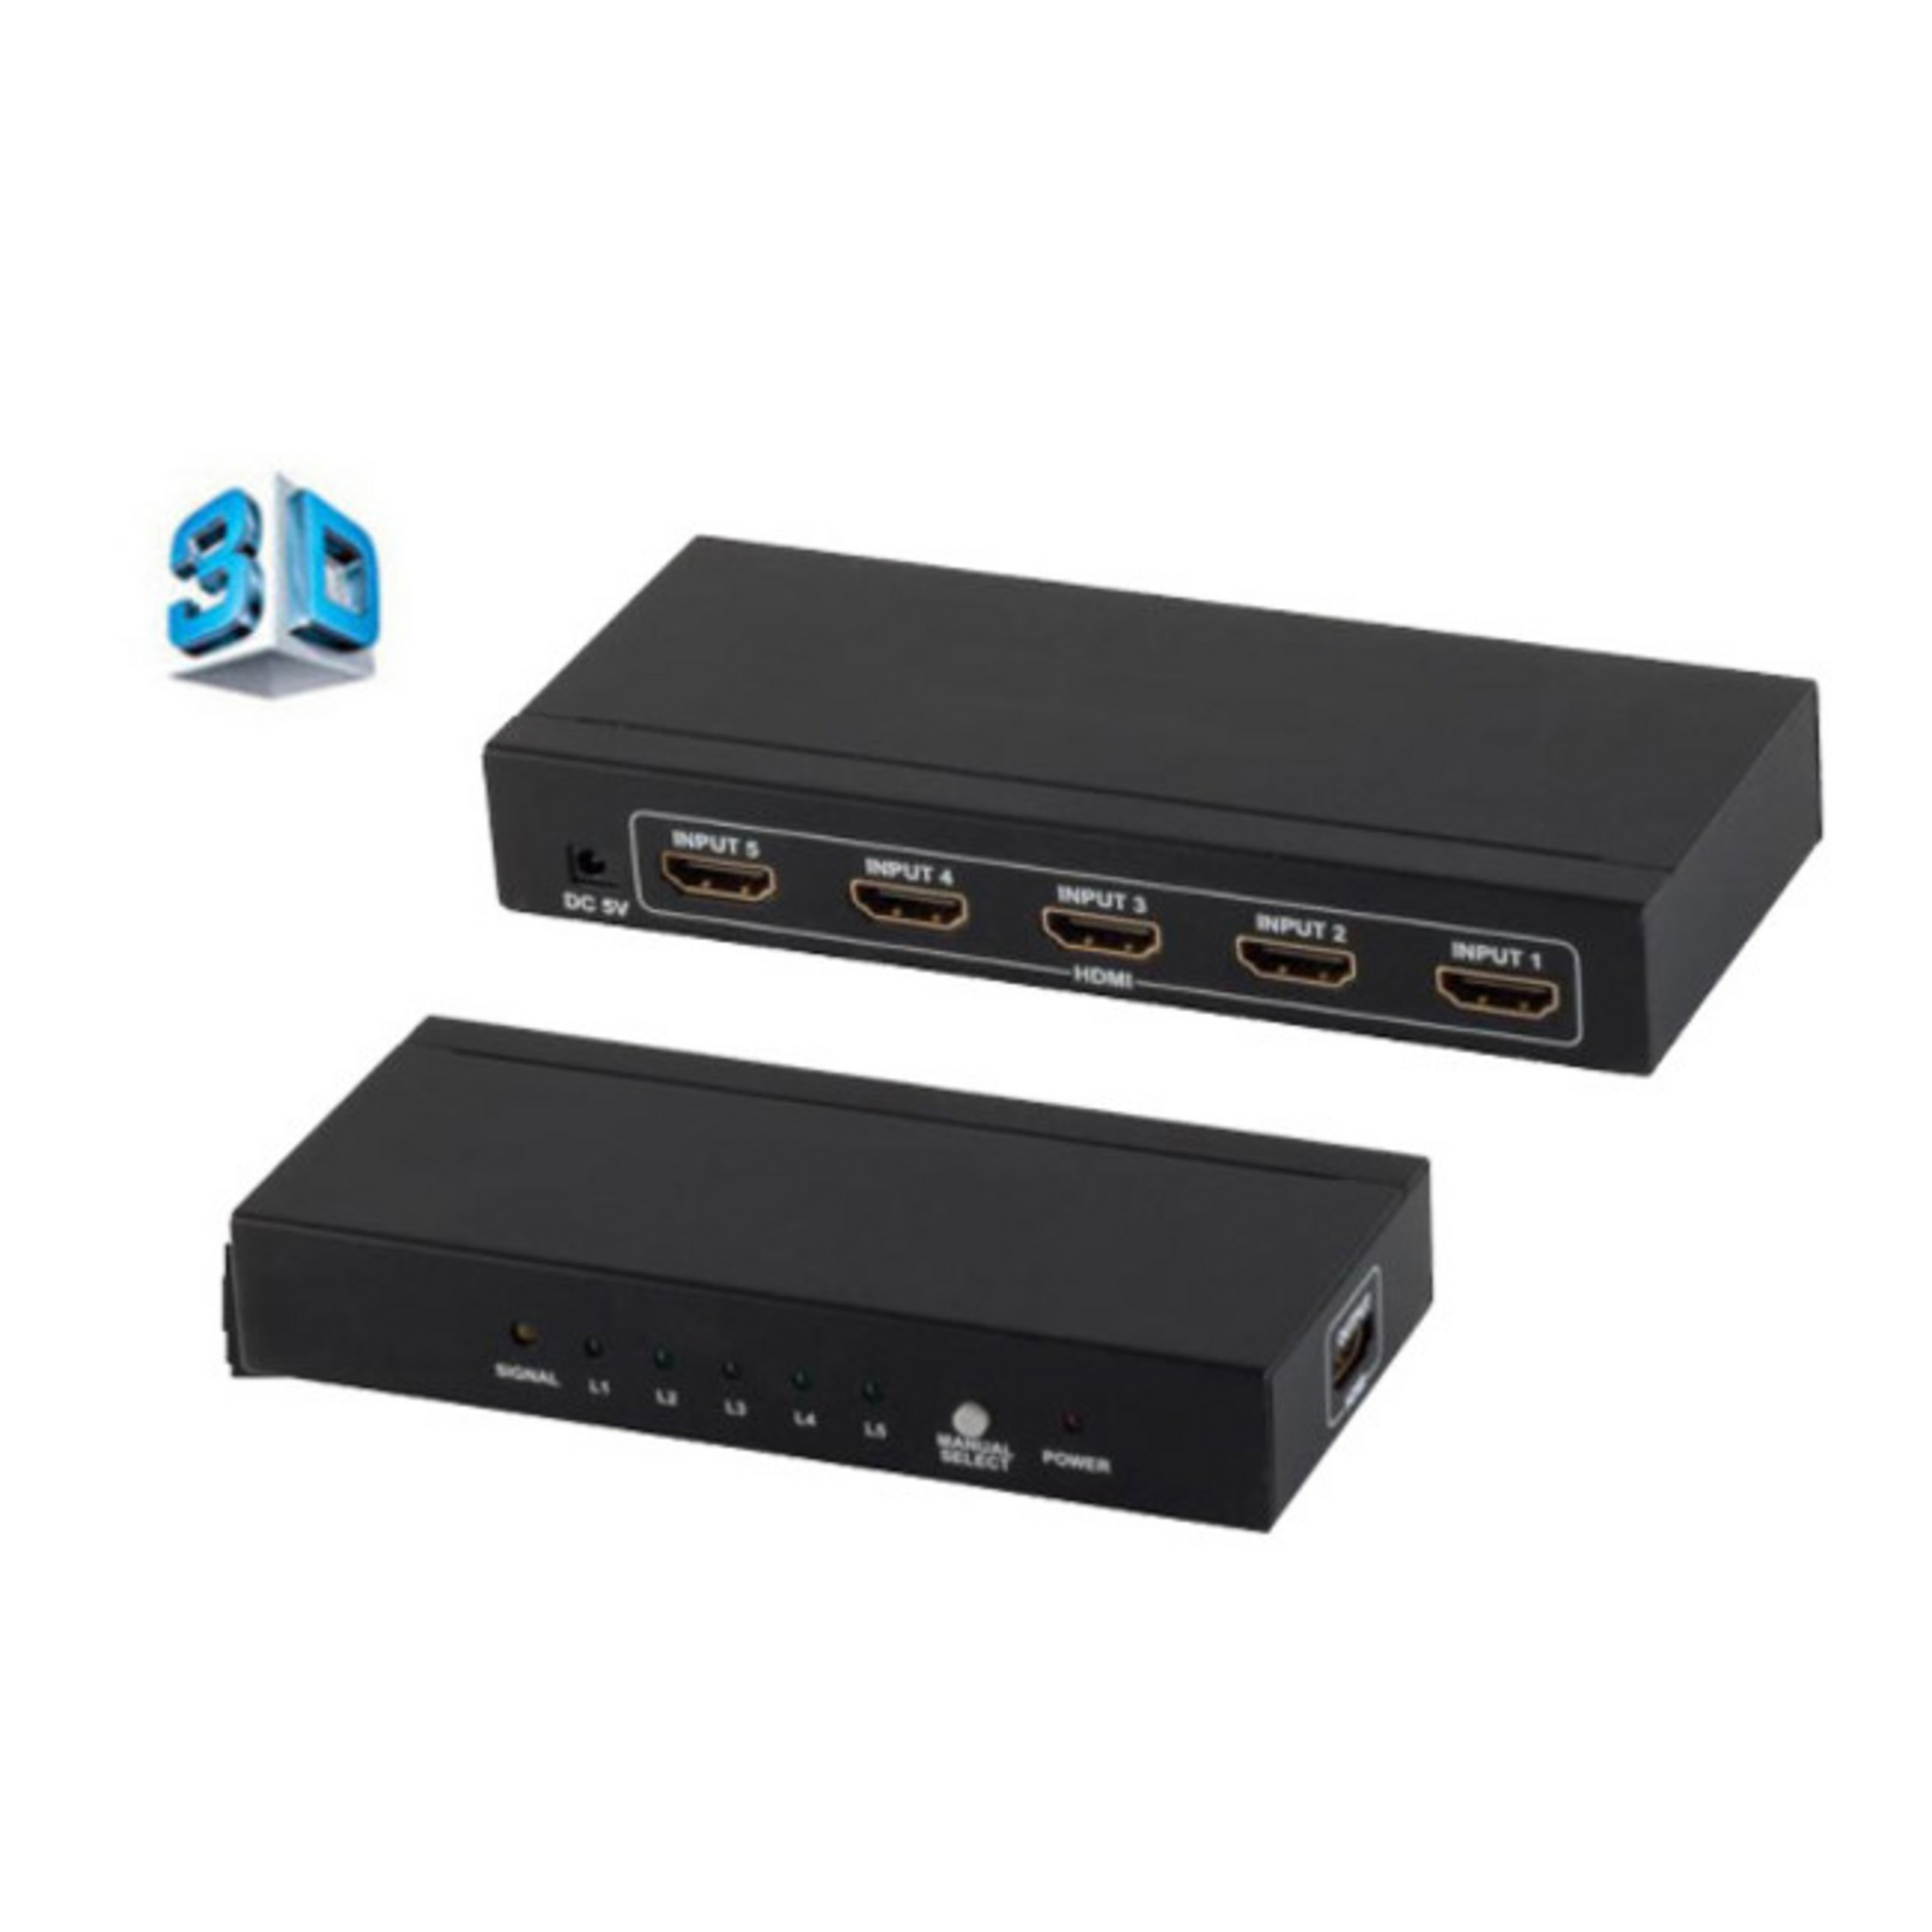 Switch 3D, VER1.4 IN OUT, Switch, HDMI 4K2K, SHIVERPEAKS 5x 1x HDMI